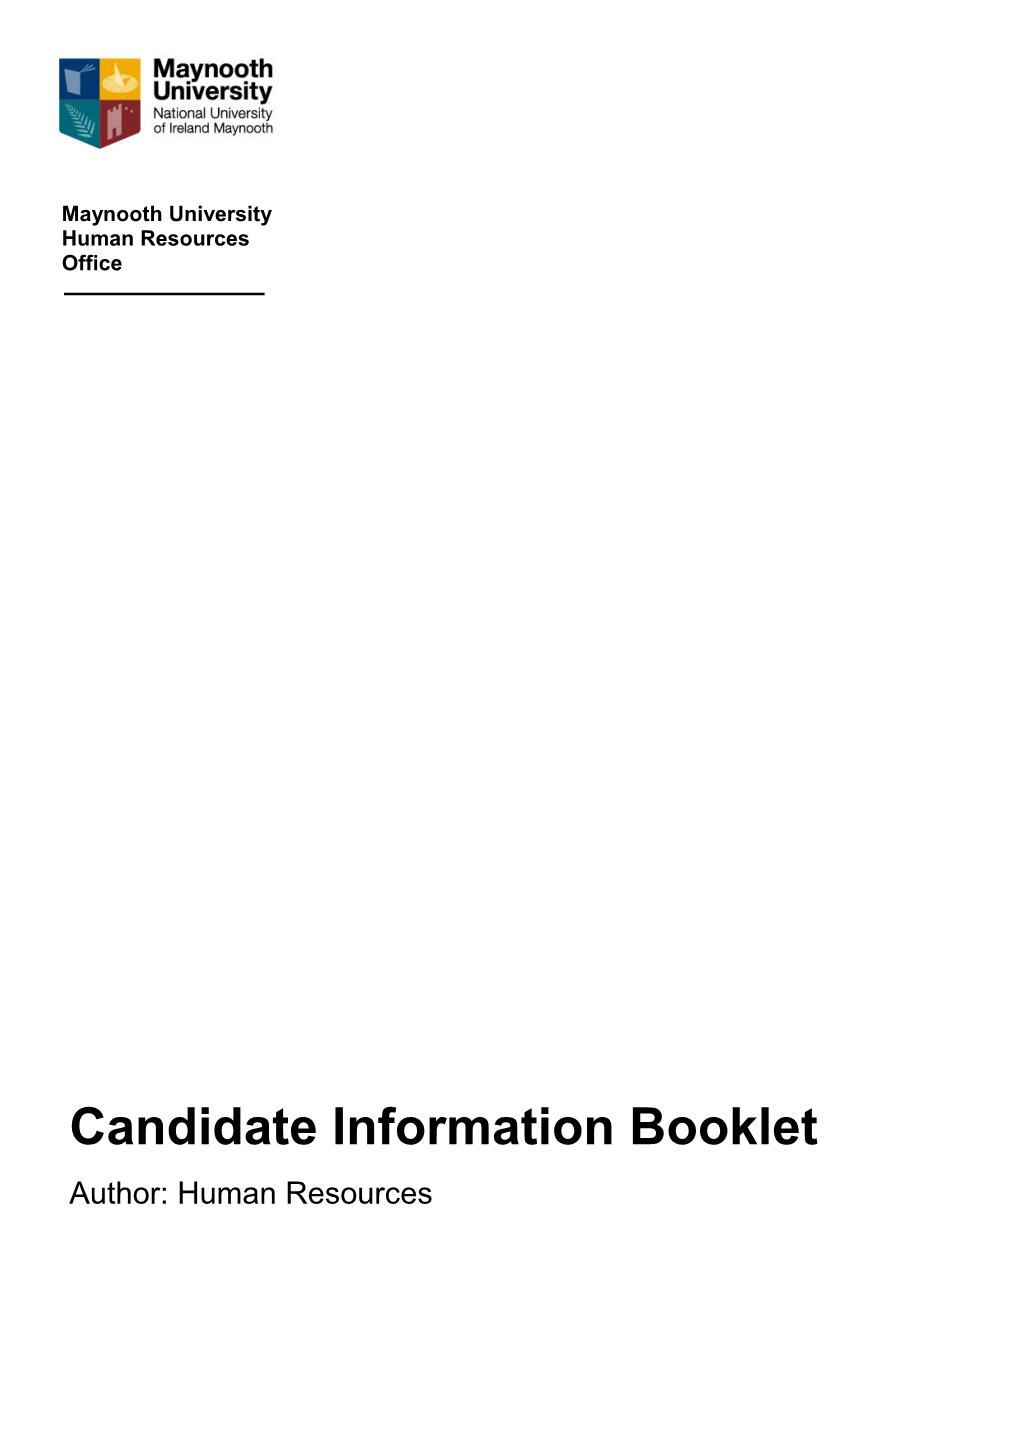 Candidate Information Booklet